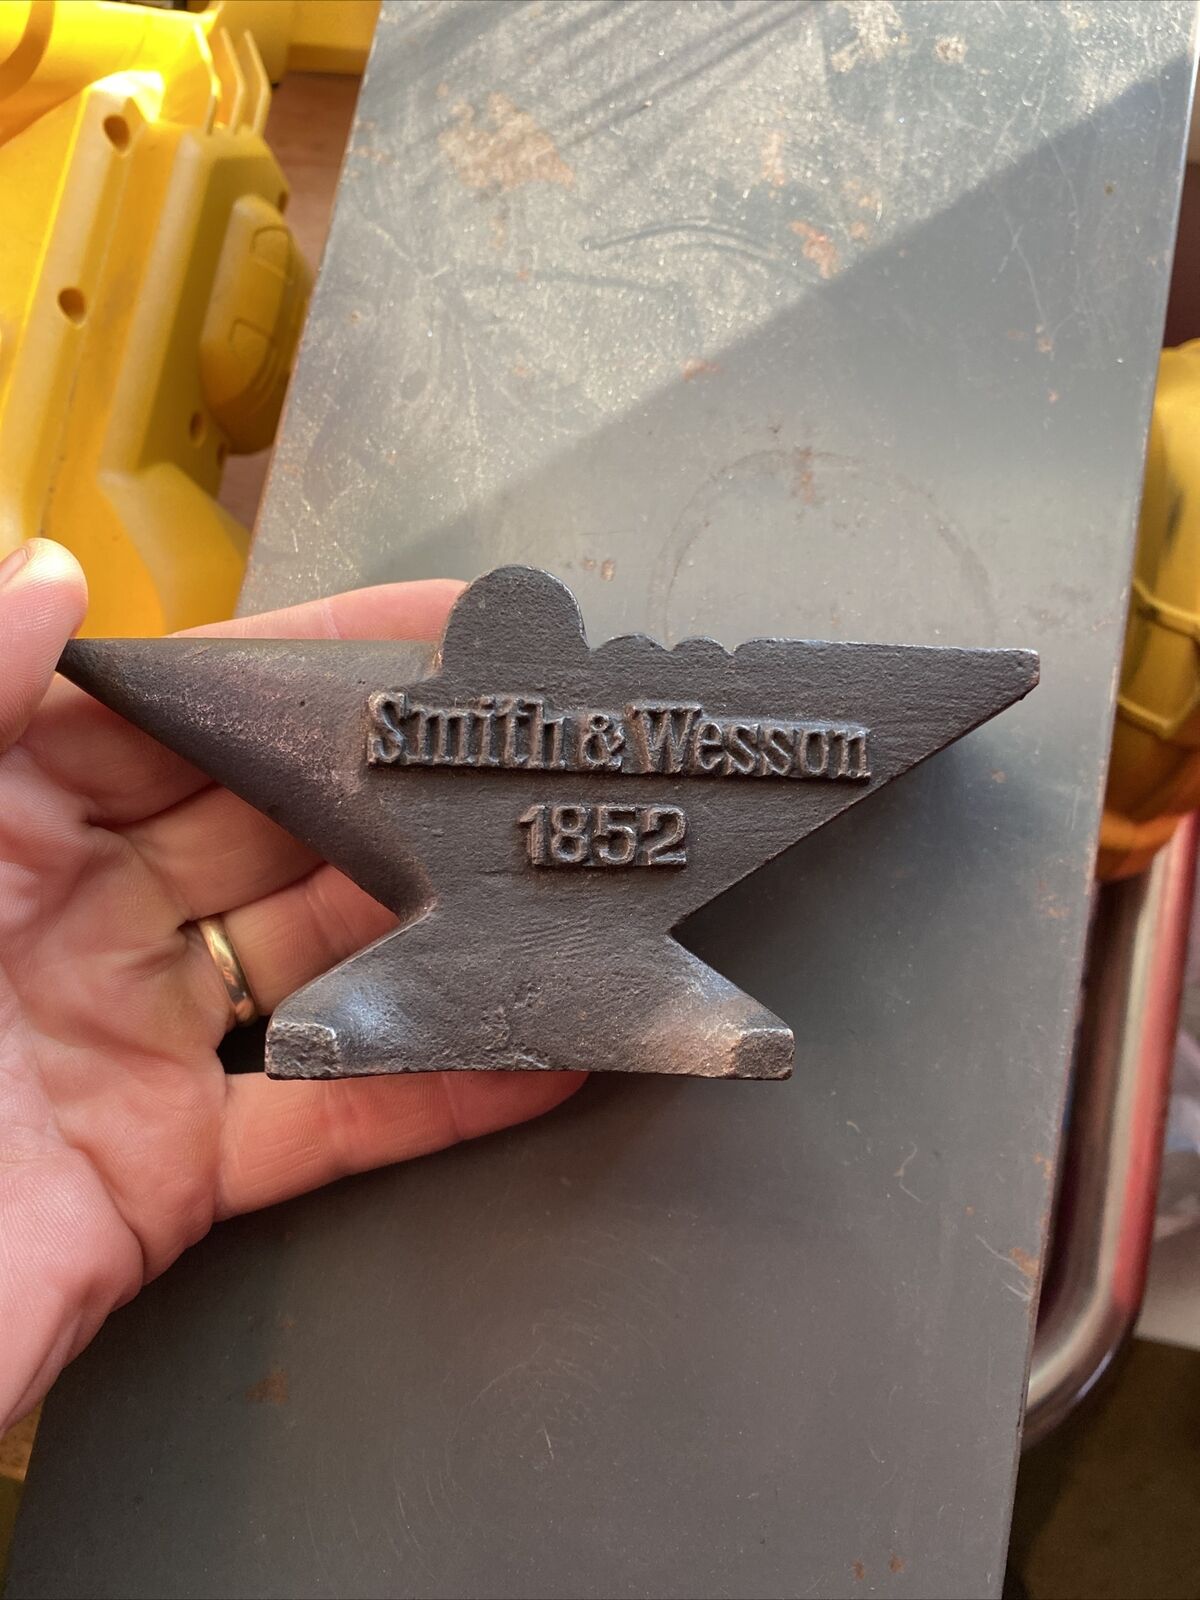 Smith Wesson Anvil Cast Iron Collector Paperweight Blacksmith Gunsmith 2+LB GIFT